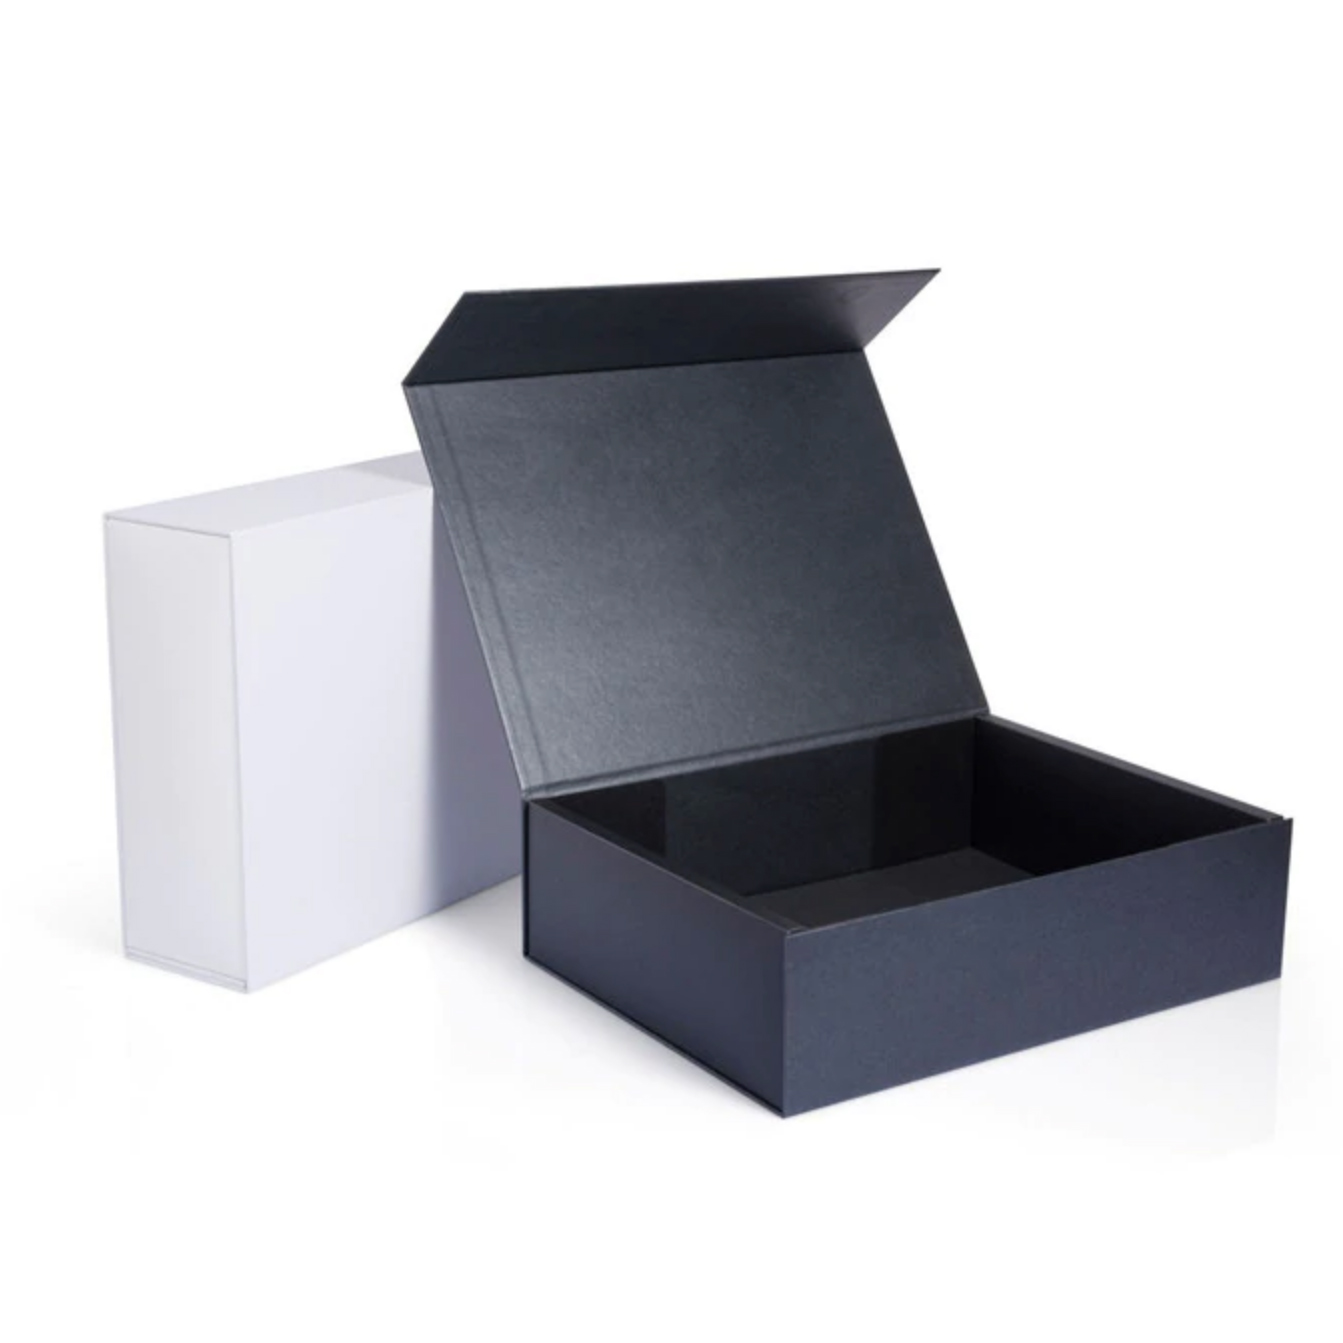 Foil Stamped Black Paper Box From Thai Box Factory For Wholesale